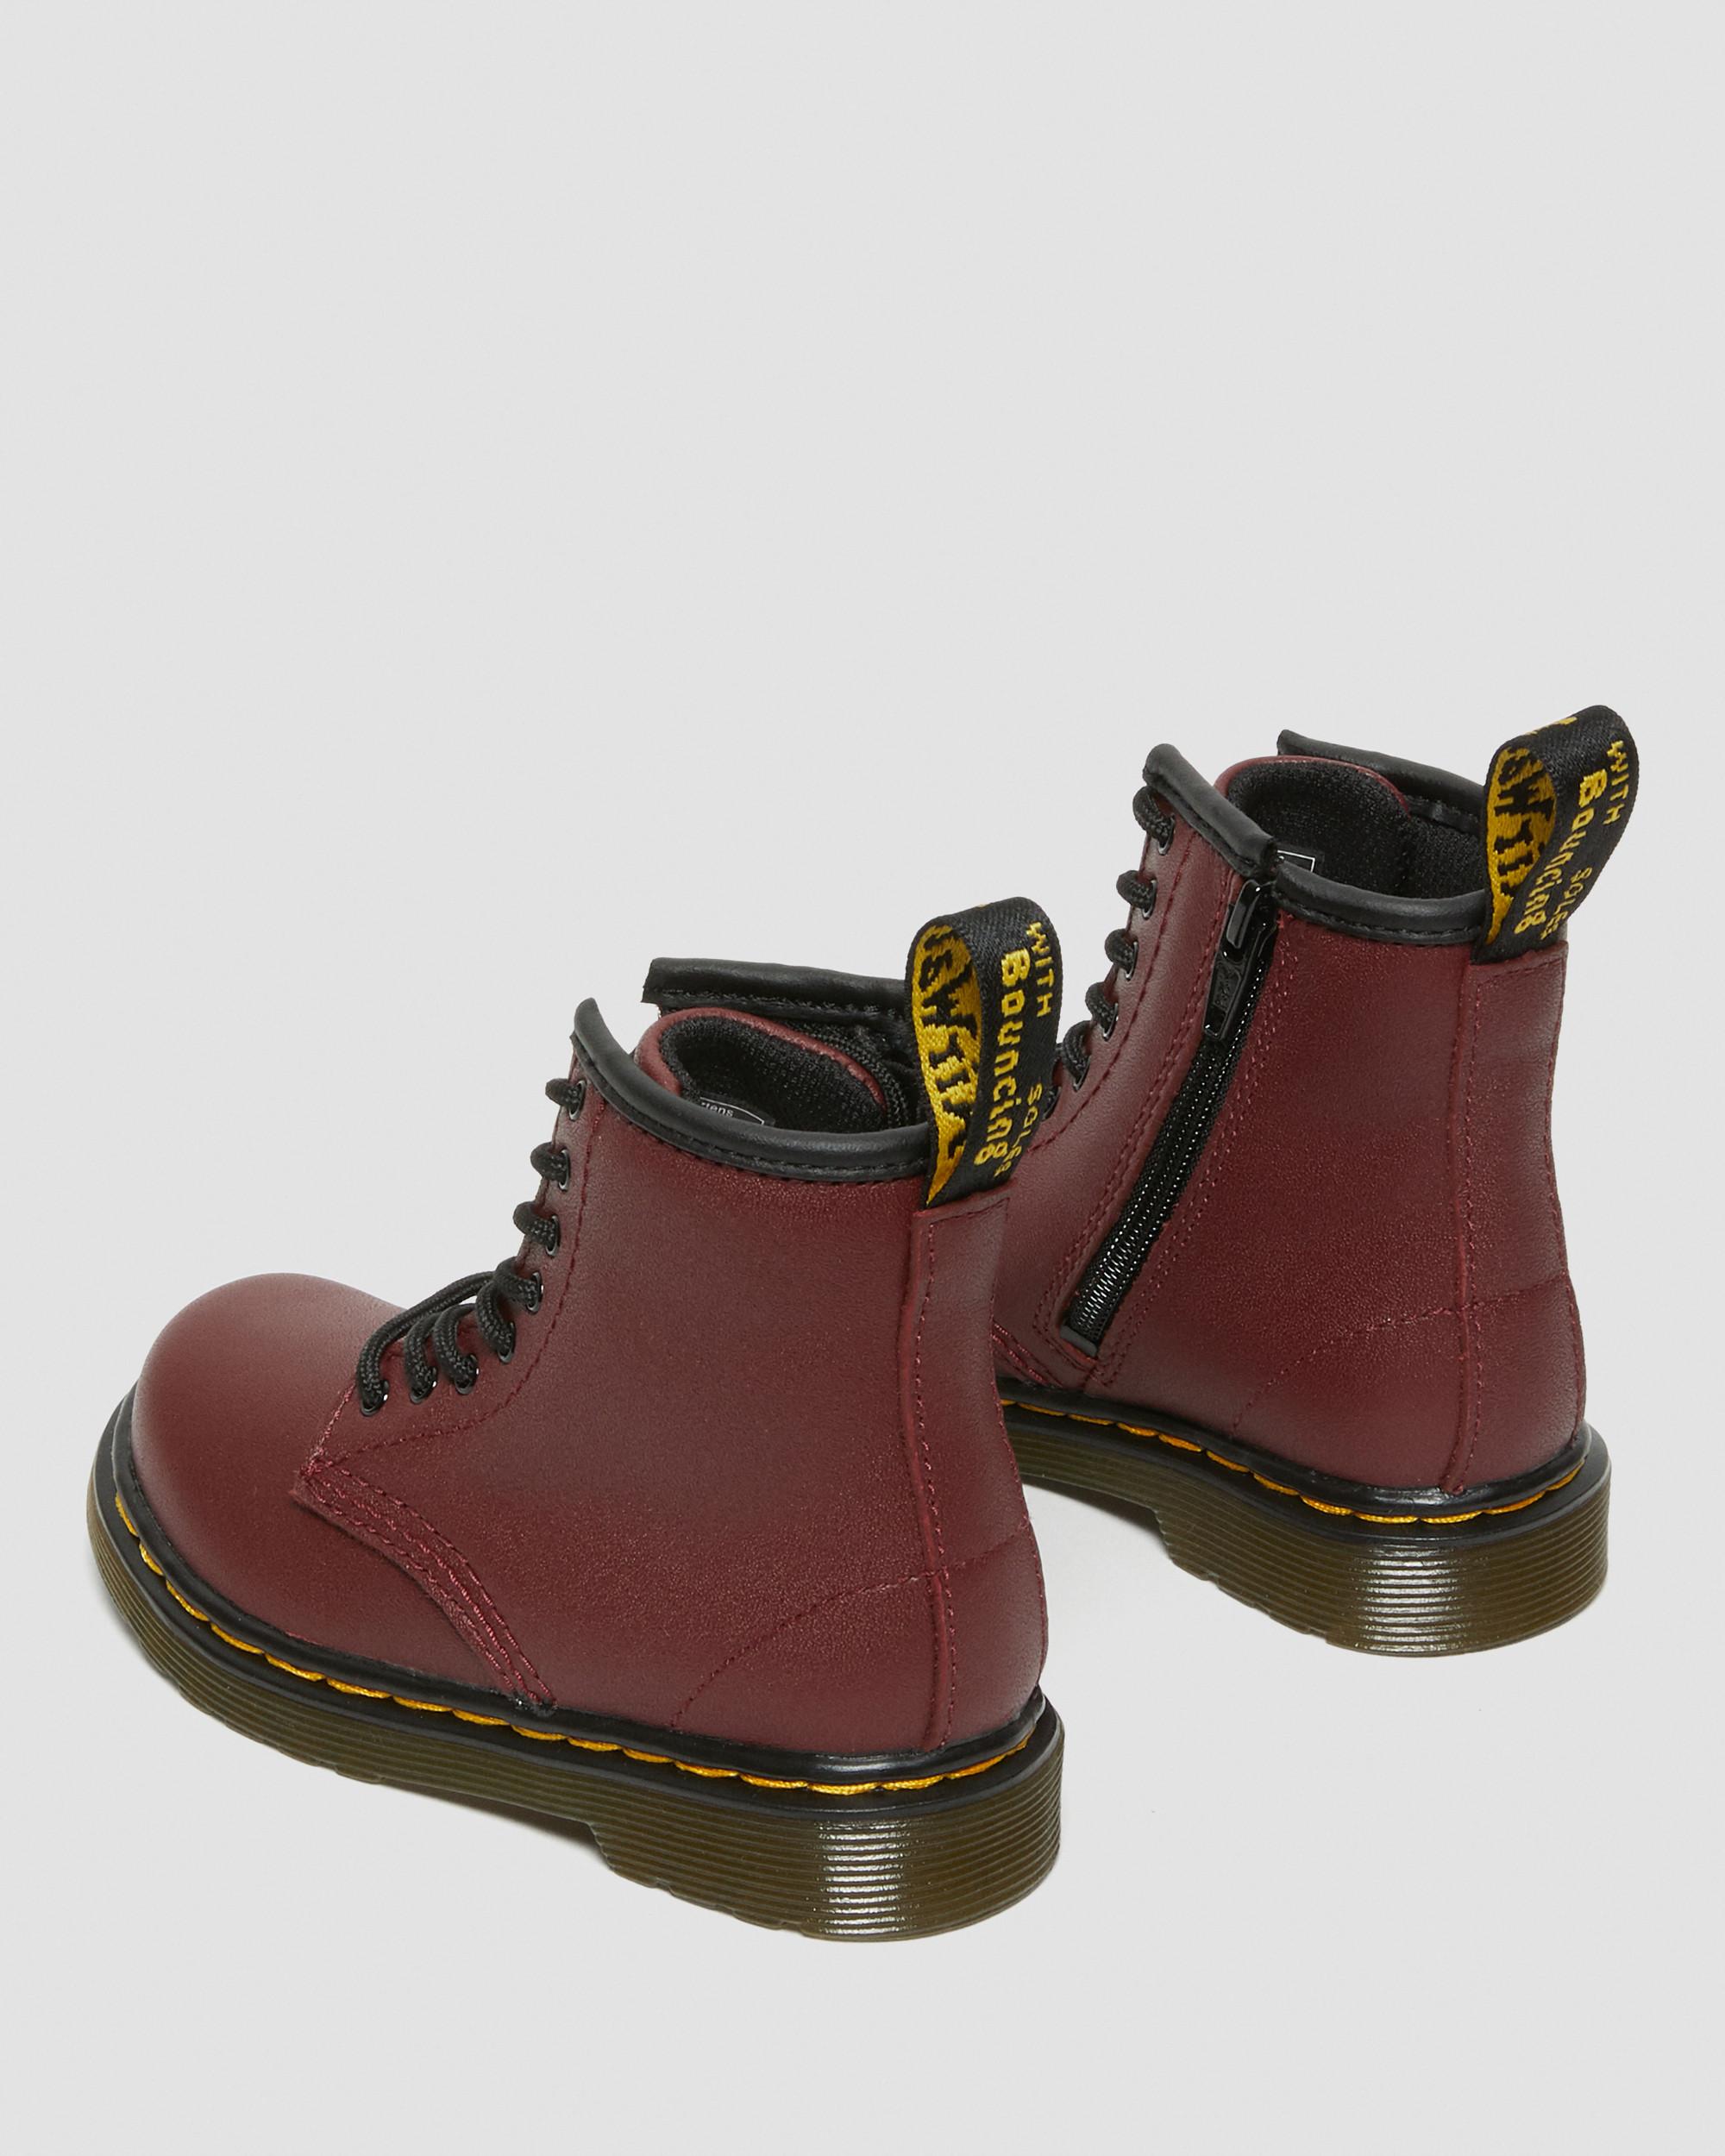 Toddler 1460 Softy T Leather Lace Up Boots in Cherry Red